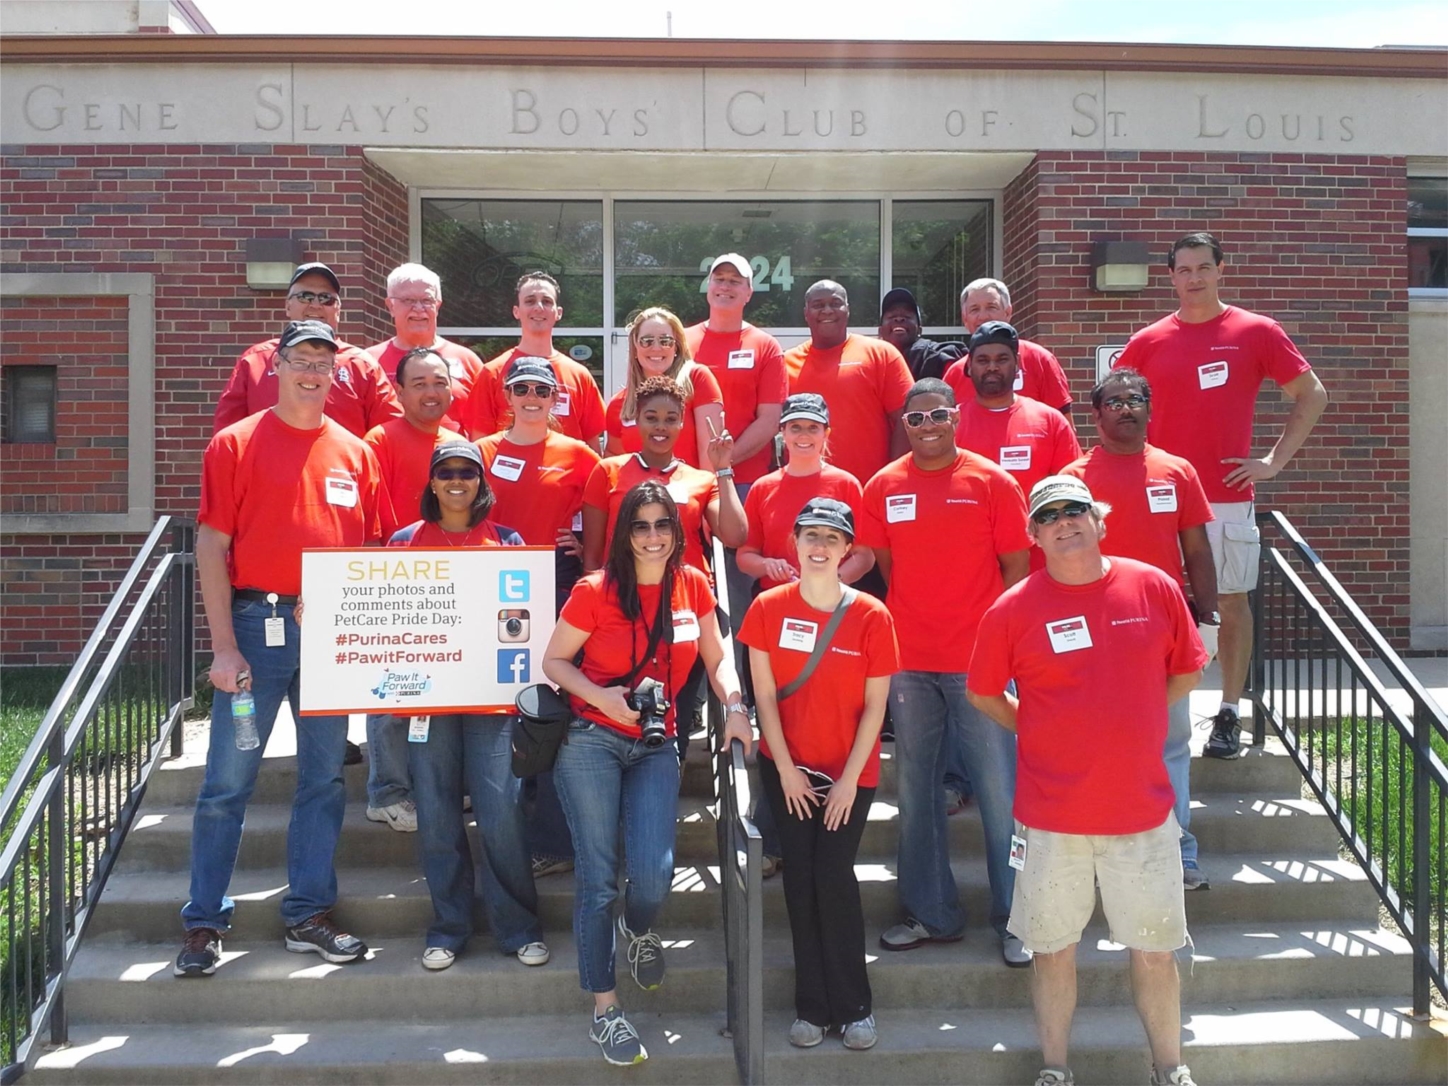 A group of associates on PetCare Pride Day came together to volunteer offsite for the Boys Club of St. Louis. PetCare Pride Day is our annual day in May of volunteering within our surrounding communities